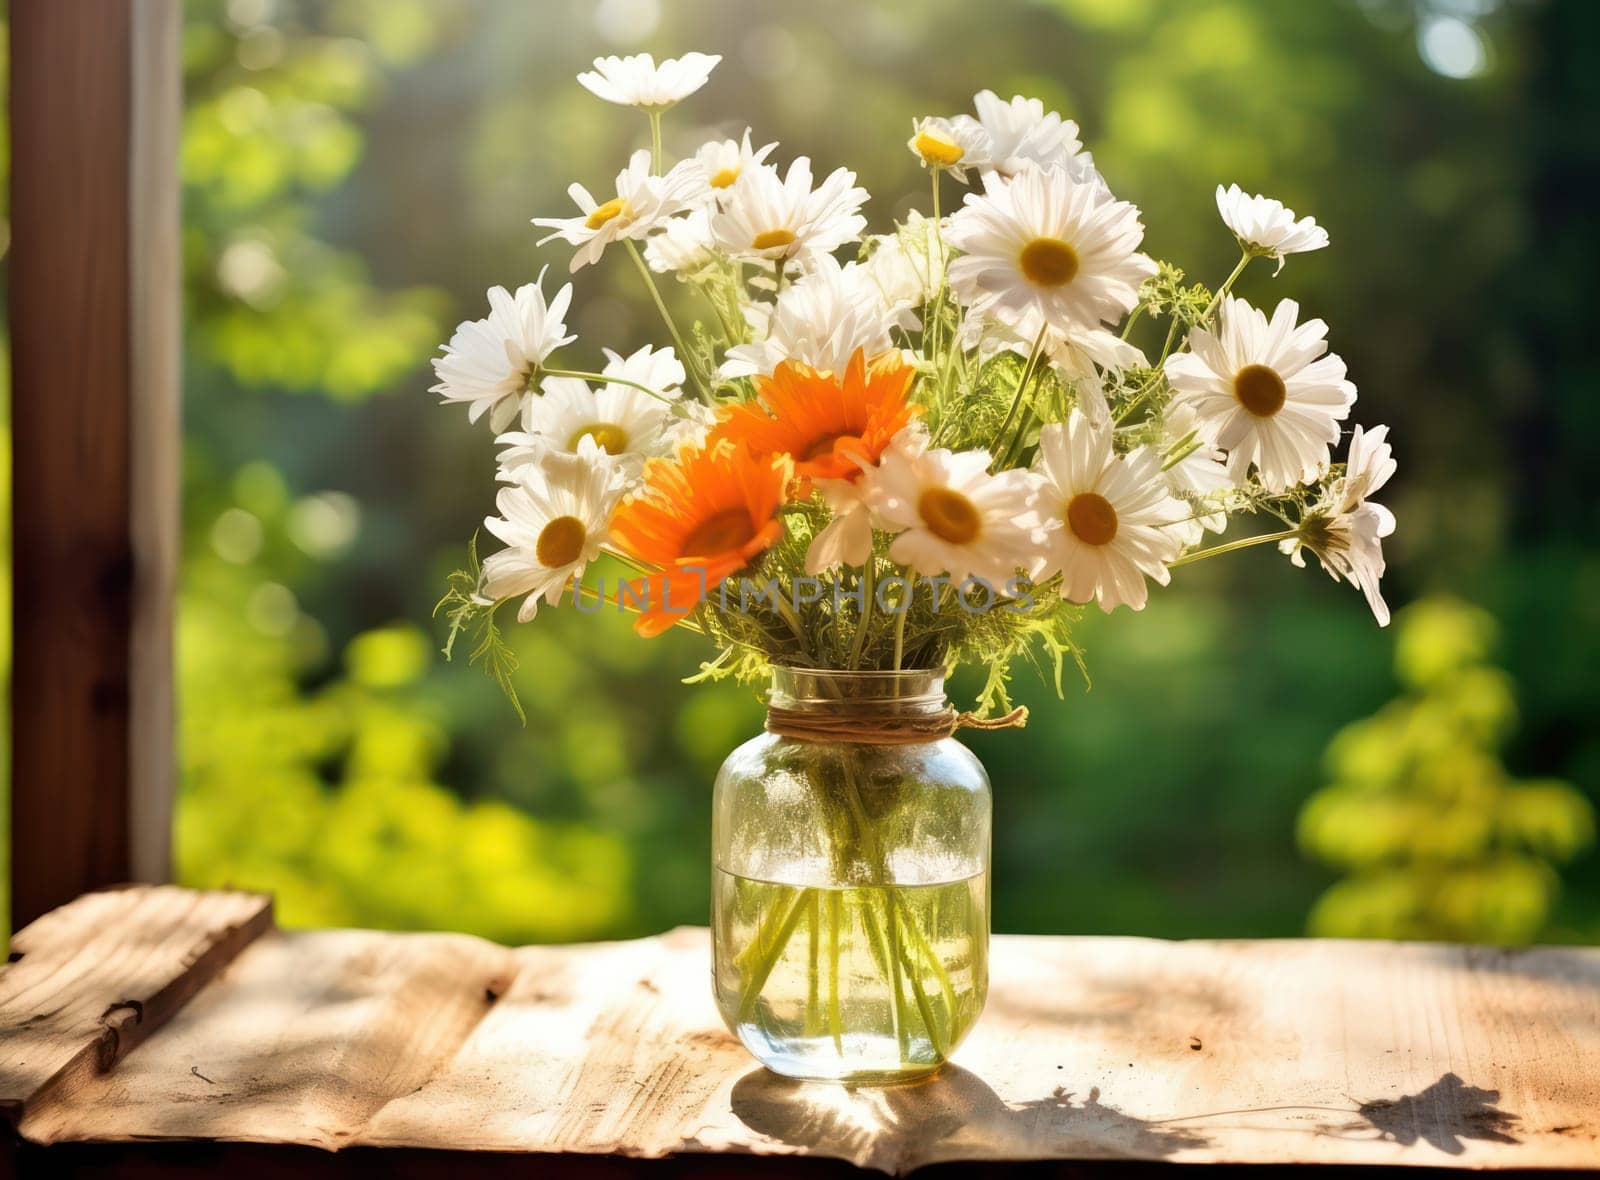 Bouquet of Blooming Daisies: A Refreshing Burst of Colors in a Rustic Wooden Vase, Embracing the Beauty of Nature in a Bright Summer Morning by Vichizh